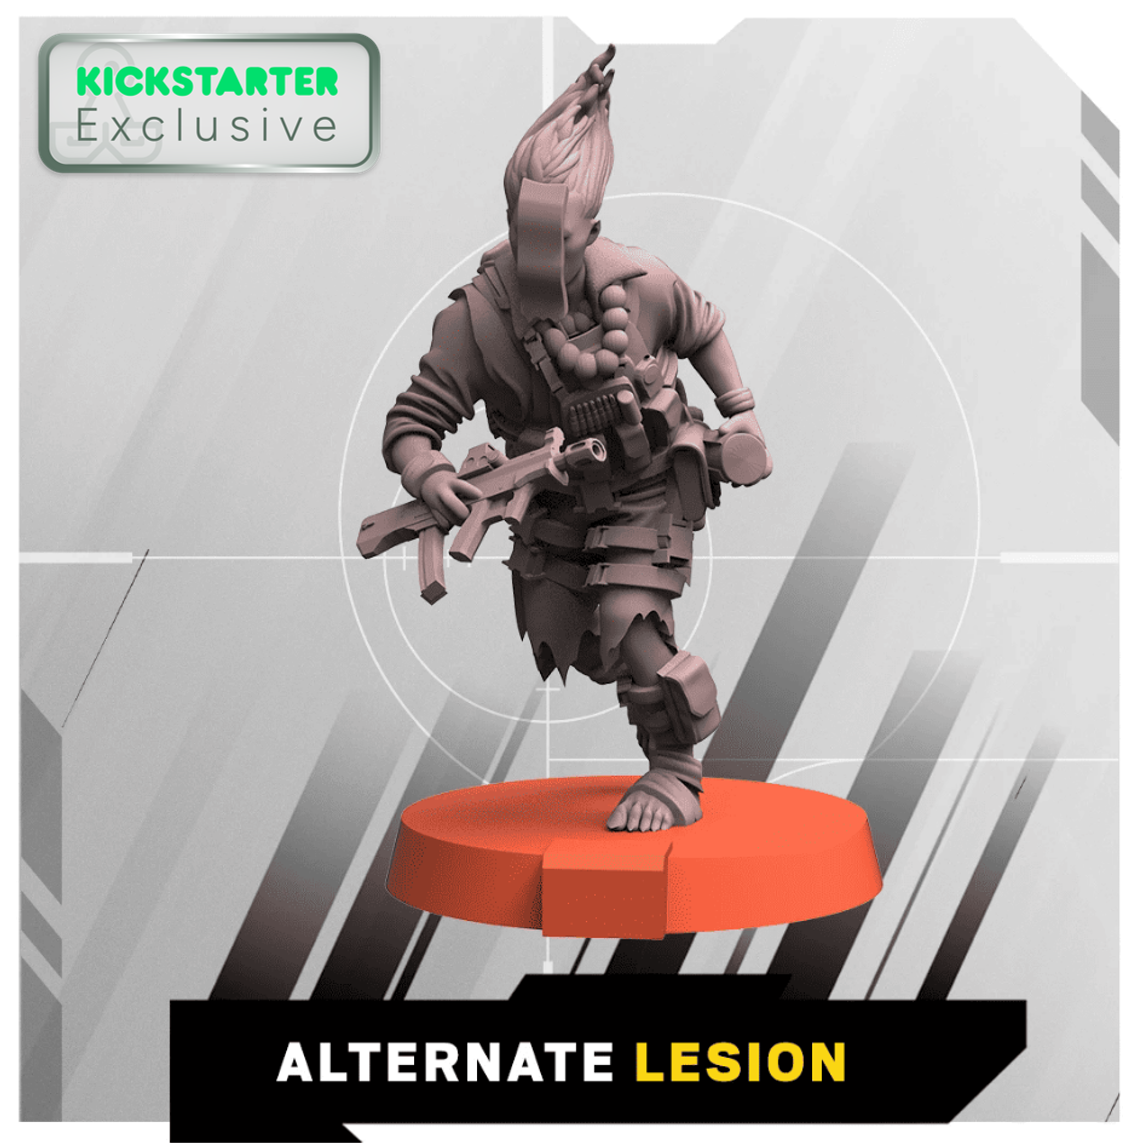 Kickstarter Exclusive Year 2 Expansion, Alternate Lesion Miniature, From 6: Siege - The Board Game